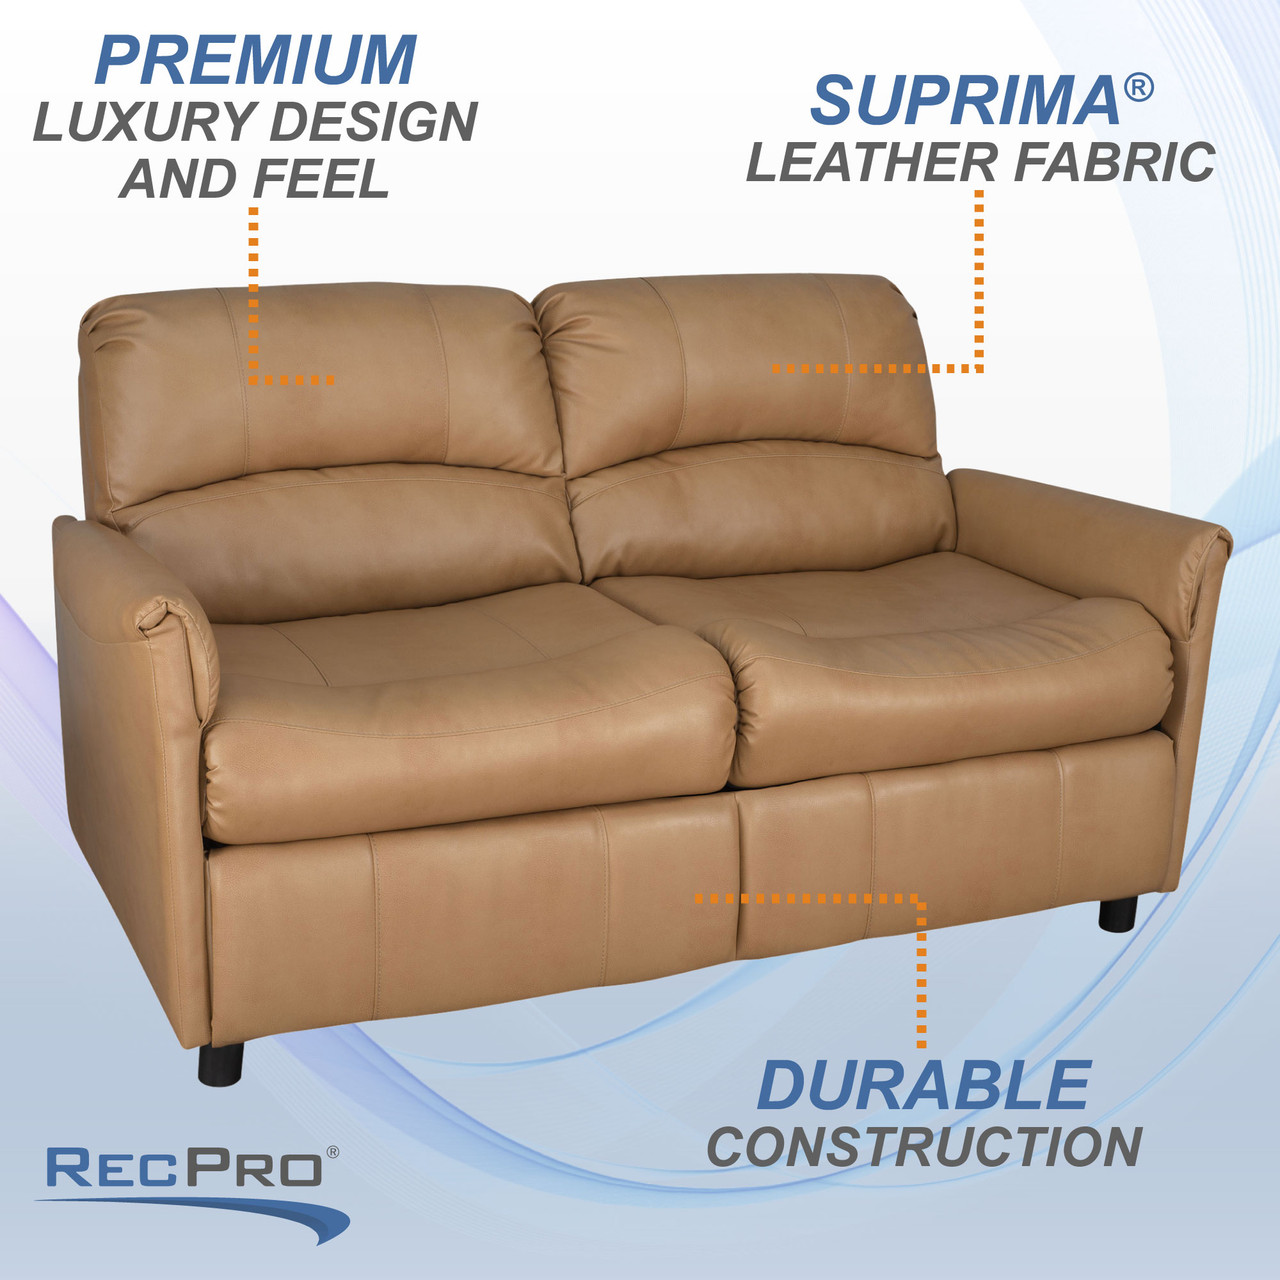 RecPro 60" RV Sofa with Hide-a-Bed - RecPro